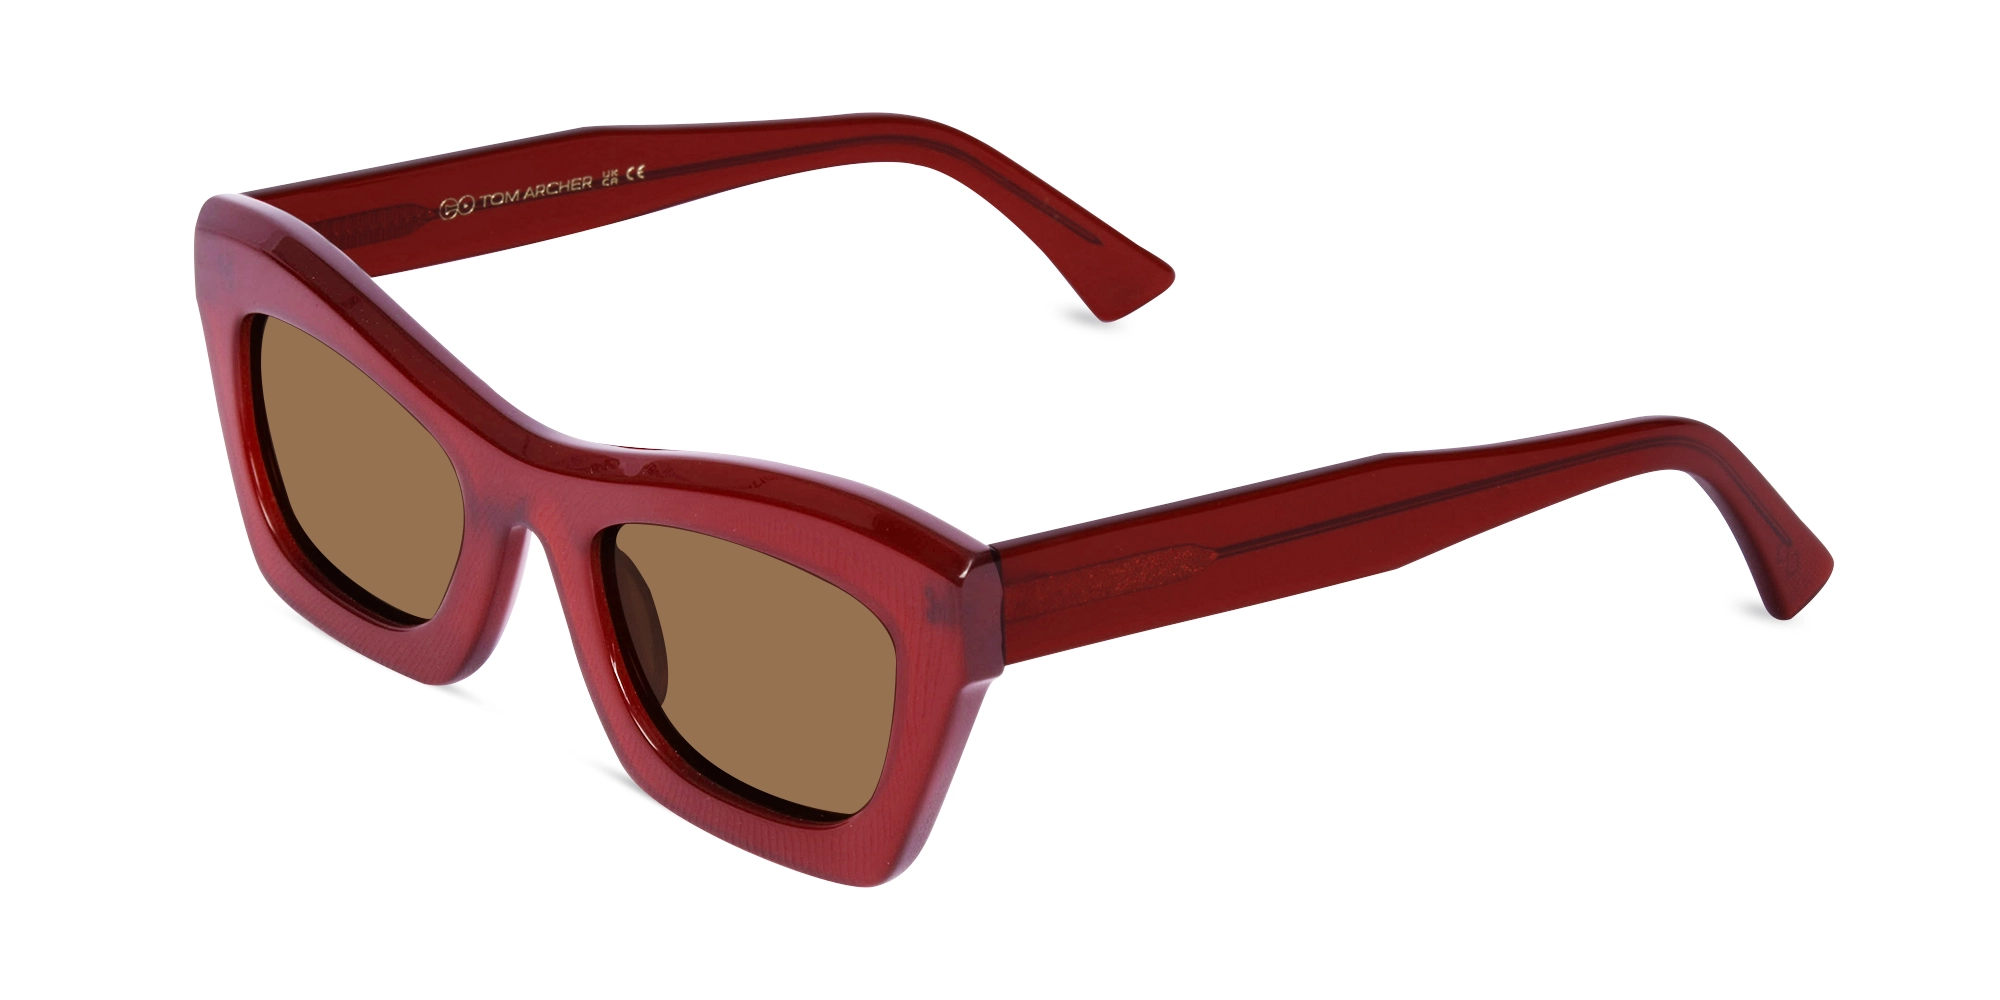 Red Thick Frame Sunglasses